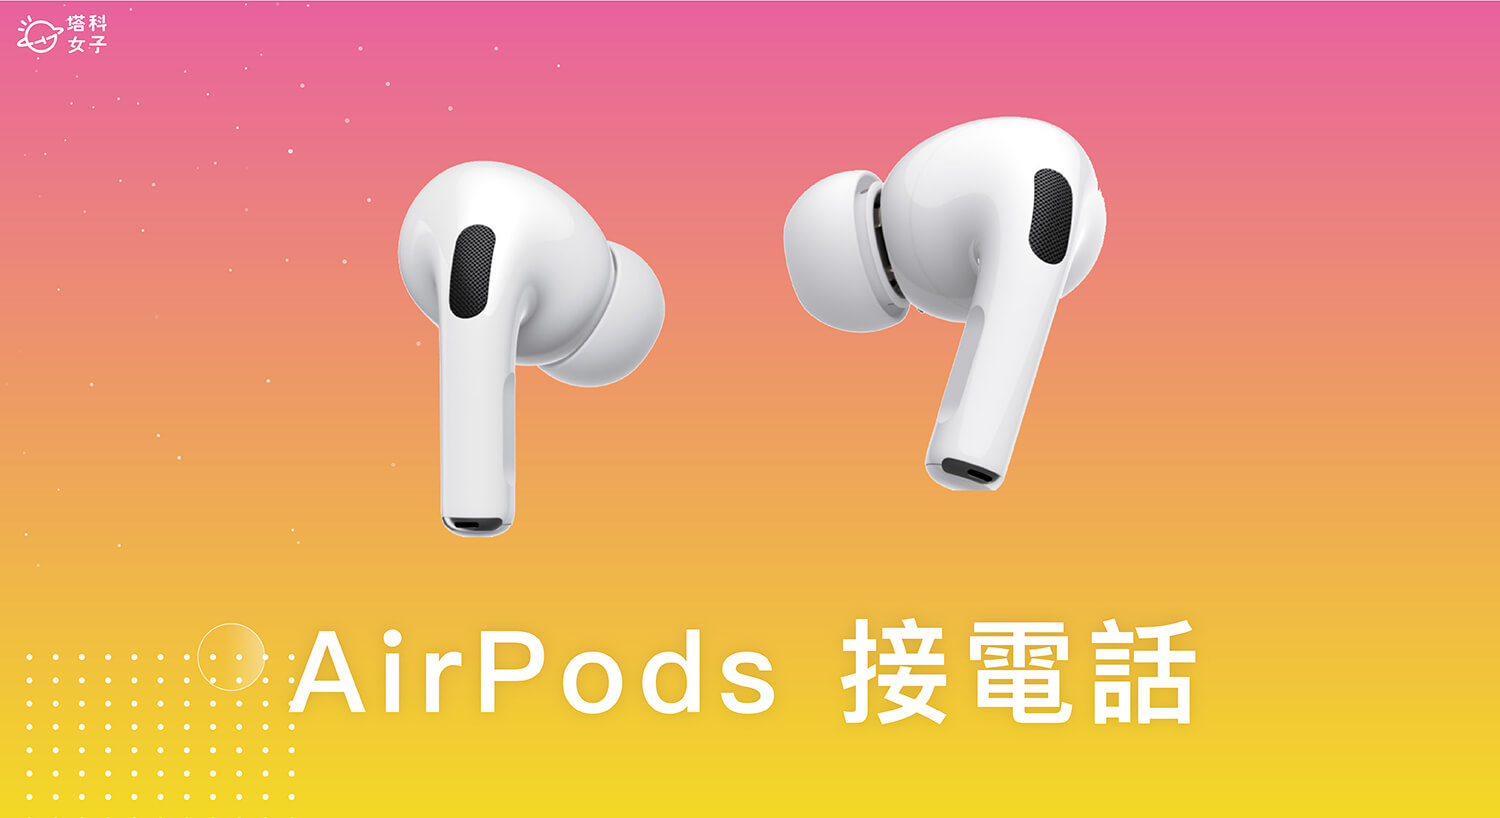 AirPods 接電話教學，在 AirPods 2 或 AirPods Pro 接聽與拒接電話